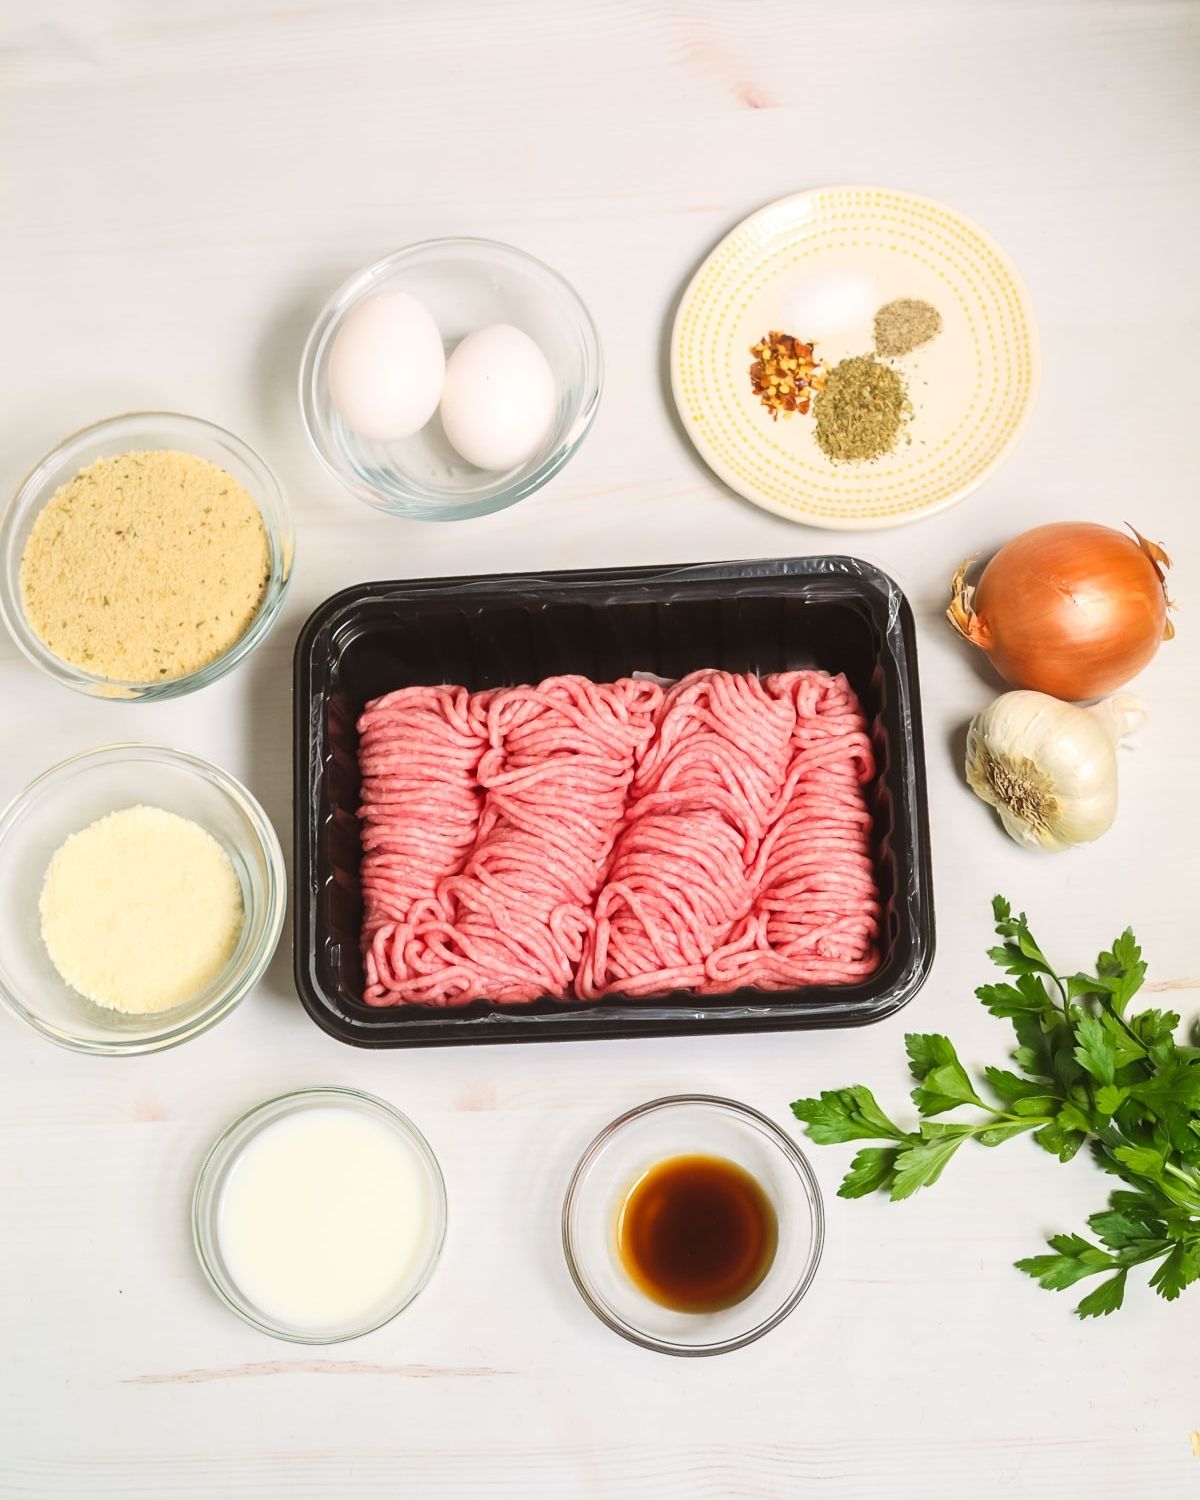 ingredients for cooking meatballs in the oven